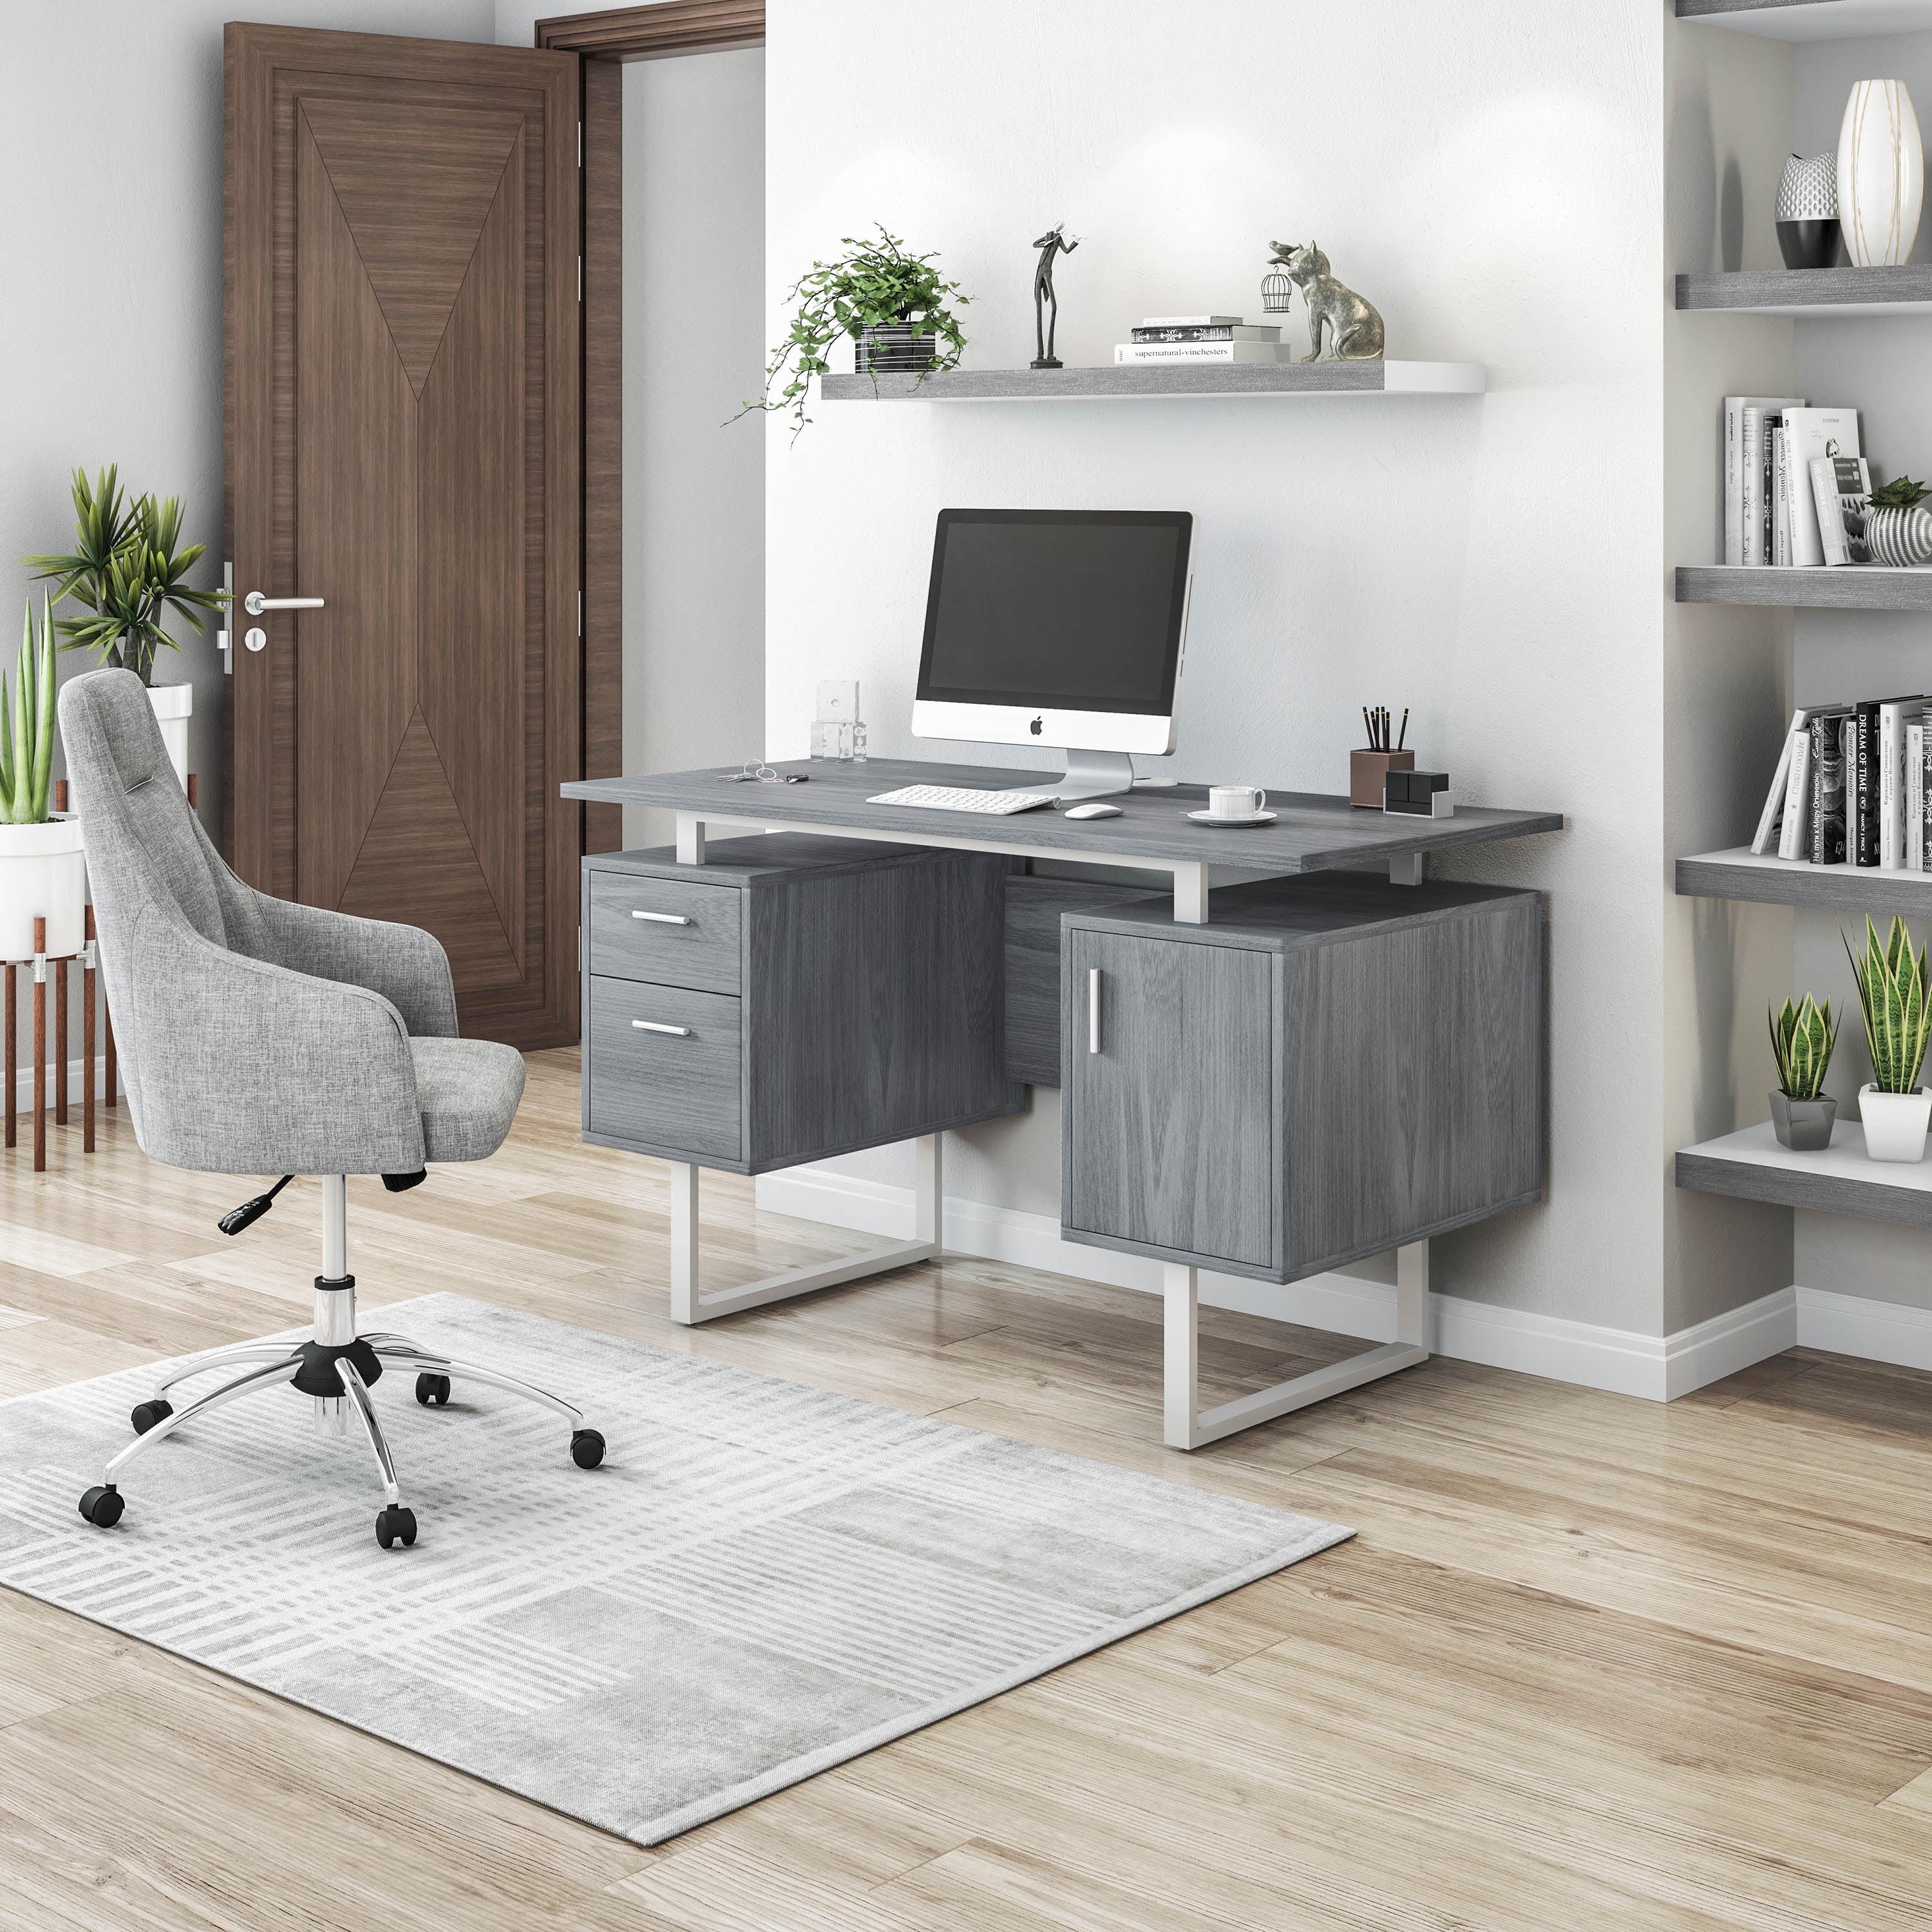 Sleek Modern Gray MDF Office Desk with Drawers and Filing Cabinet